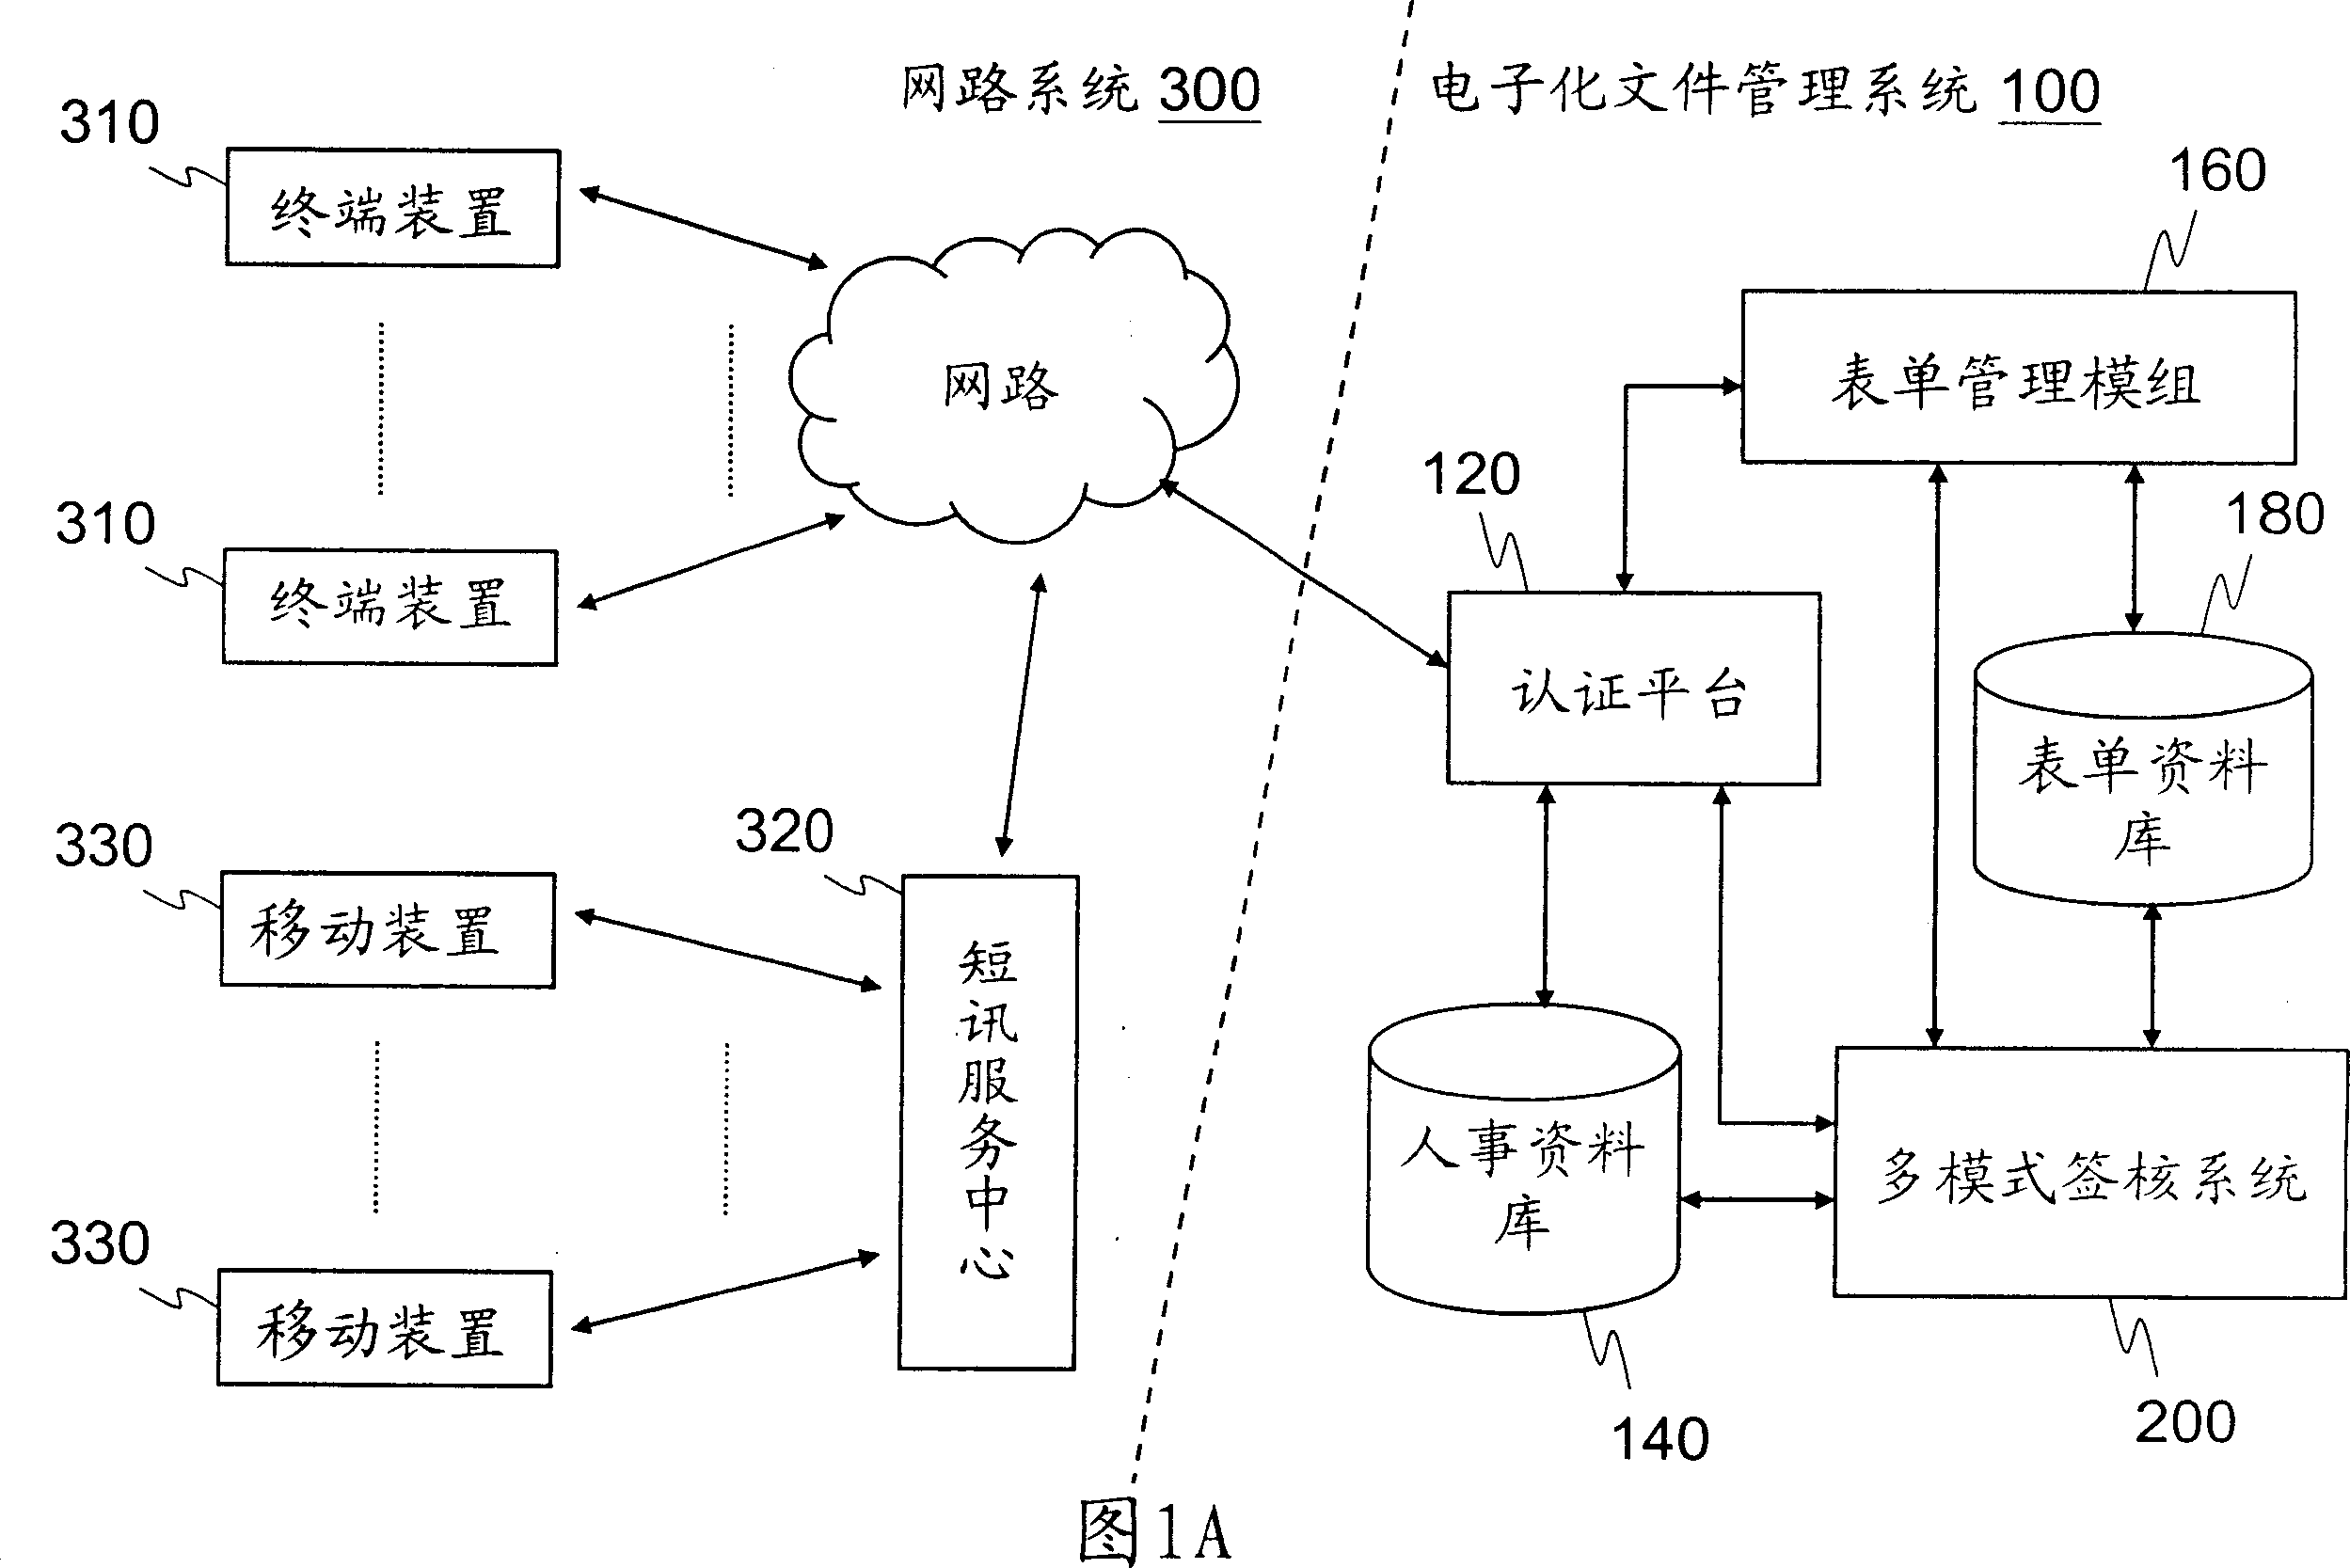 Multiple-mode checking system and method